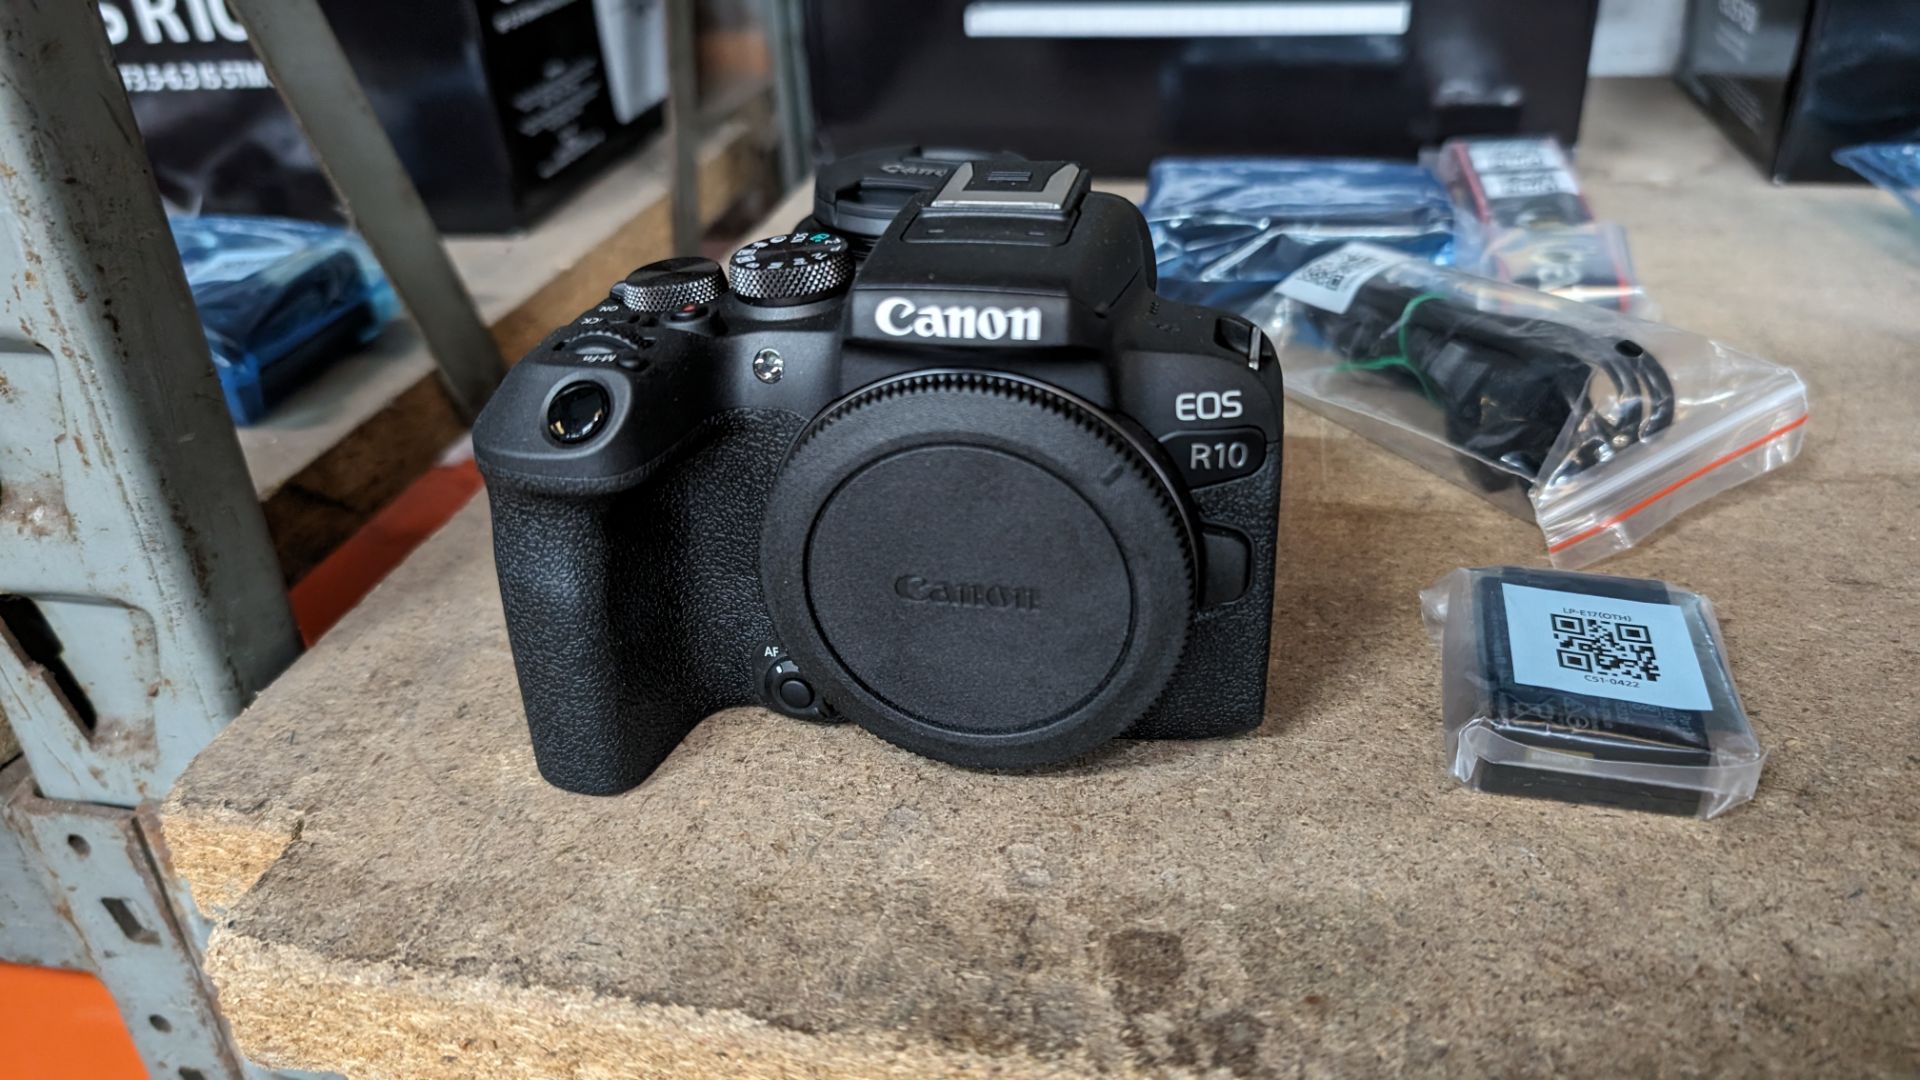 Canon EOS R10 camera kit, including 18-45mm lens, plus strap, battery, charger, cable and more - Image 4 of 14